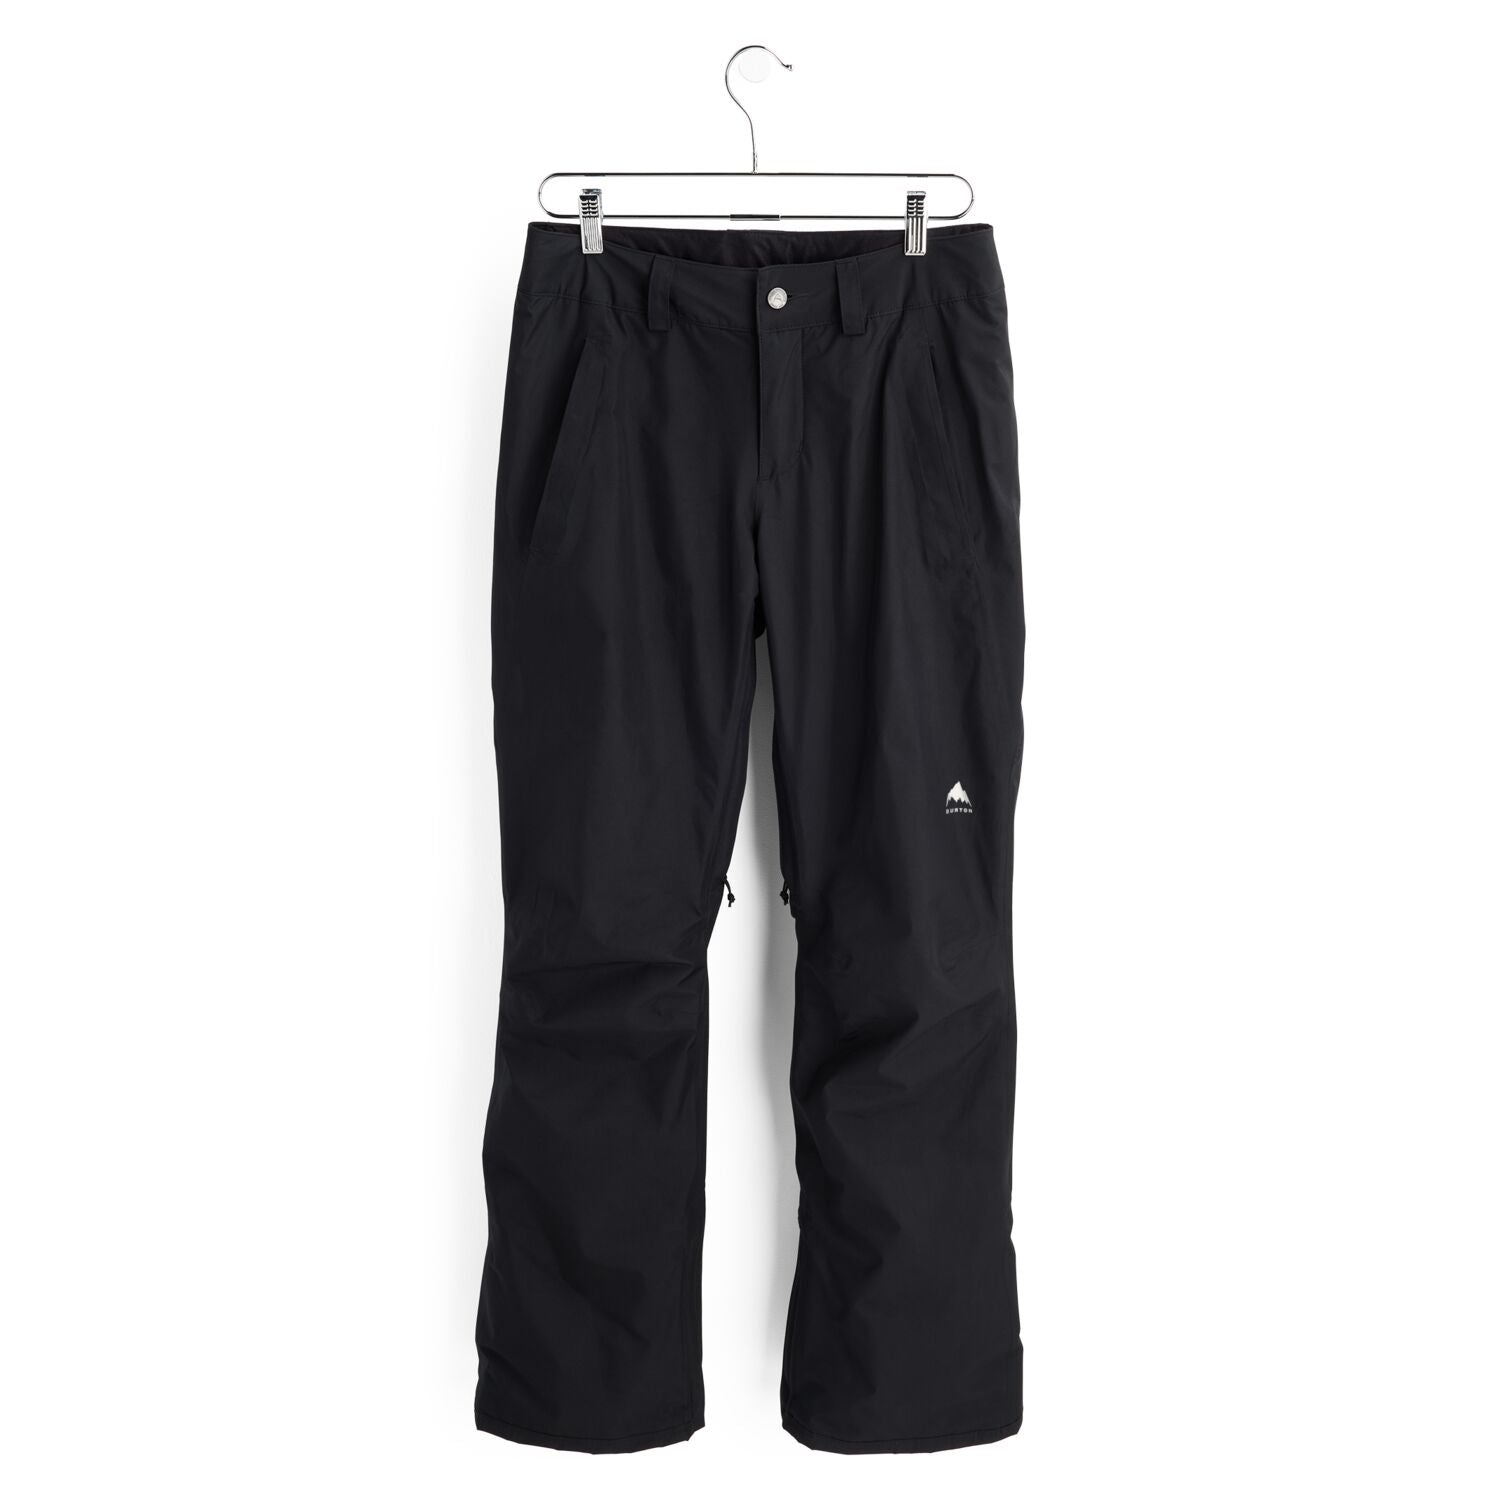 Nike Insulated Snow Pants for Women